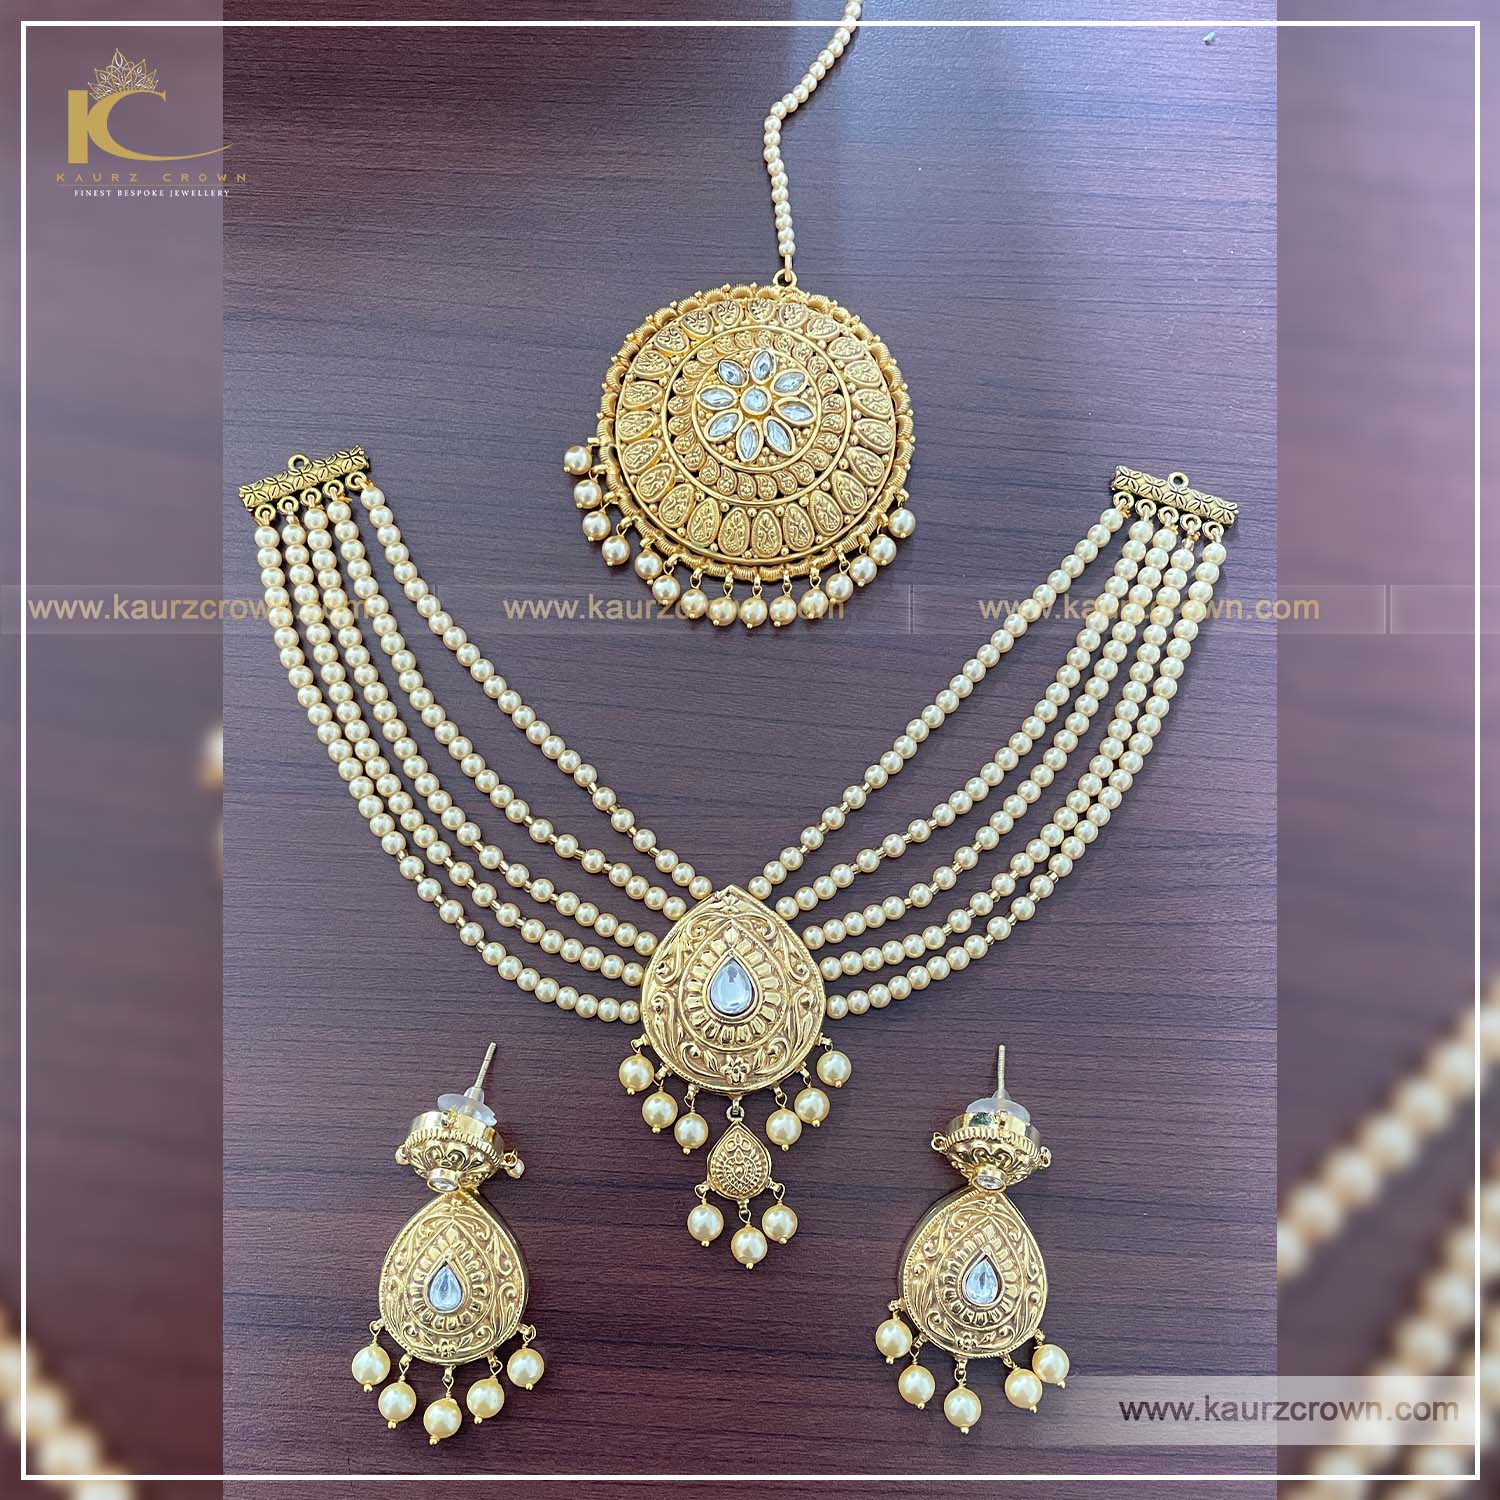 Shaziya Traditional Antique Gold Plated Necklace Set , kaurz crown jewellery , online jewellery store , shaziya necklace set , gold plated necklace set , antique jewellery store